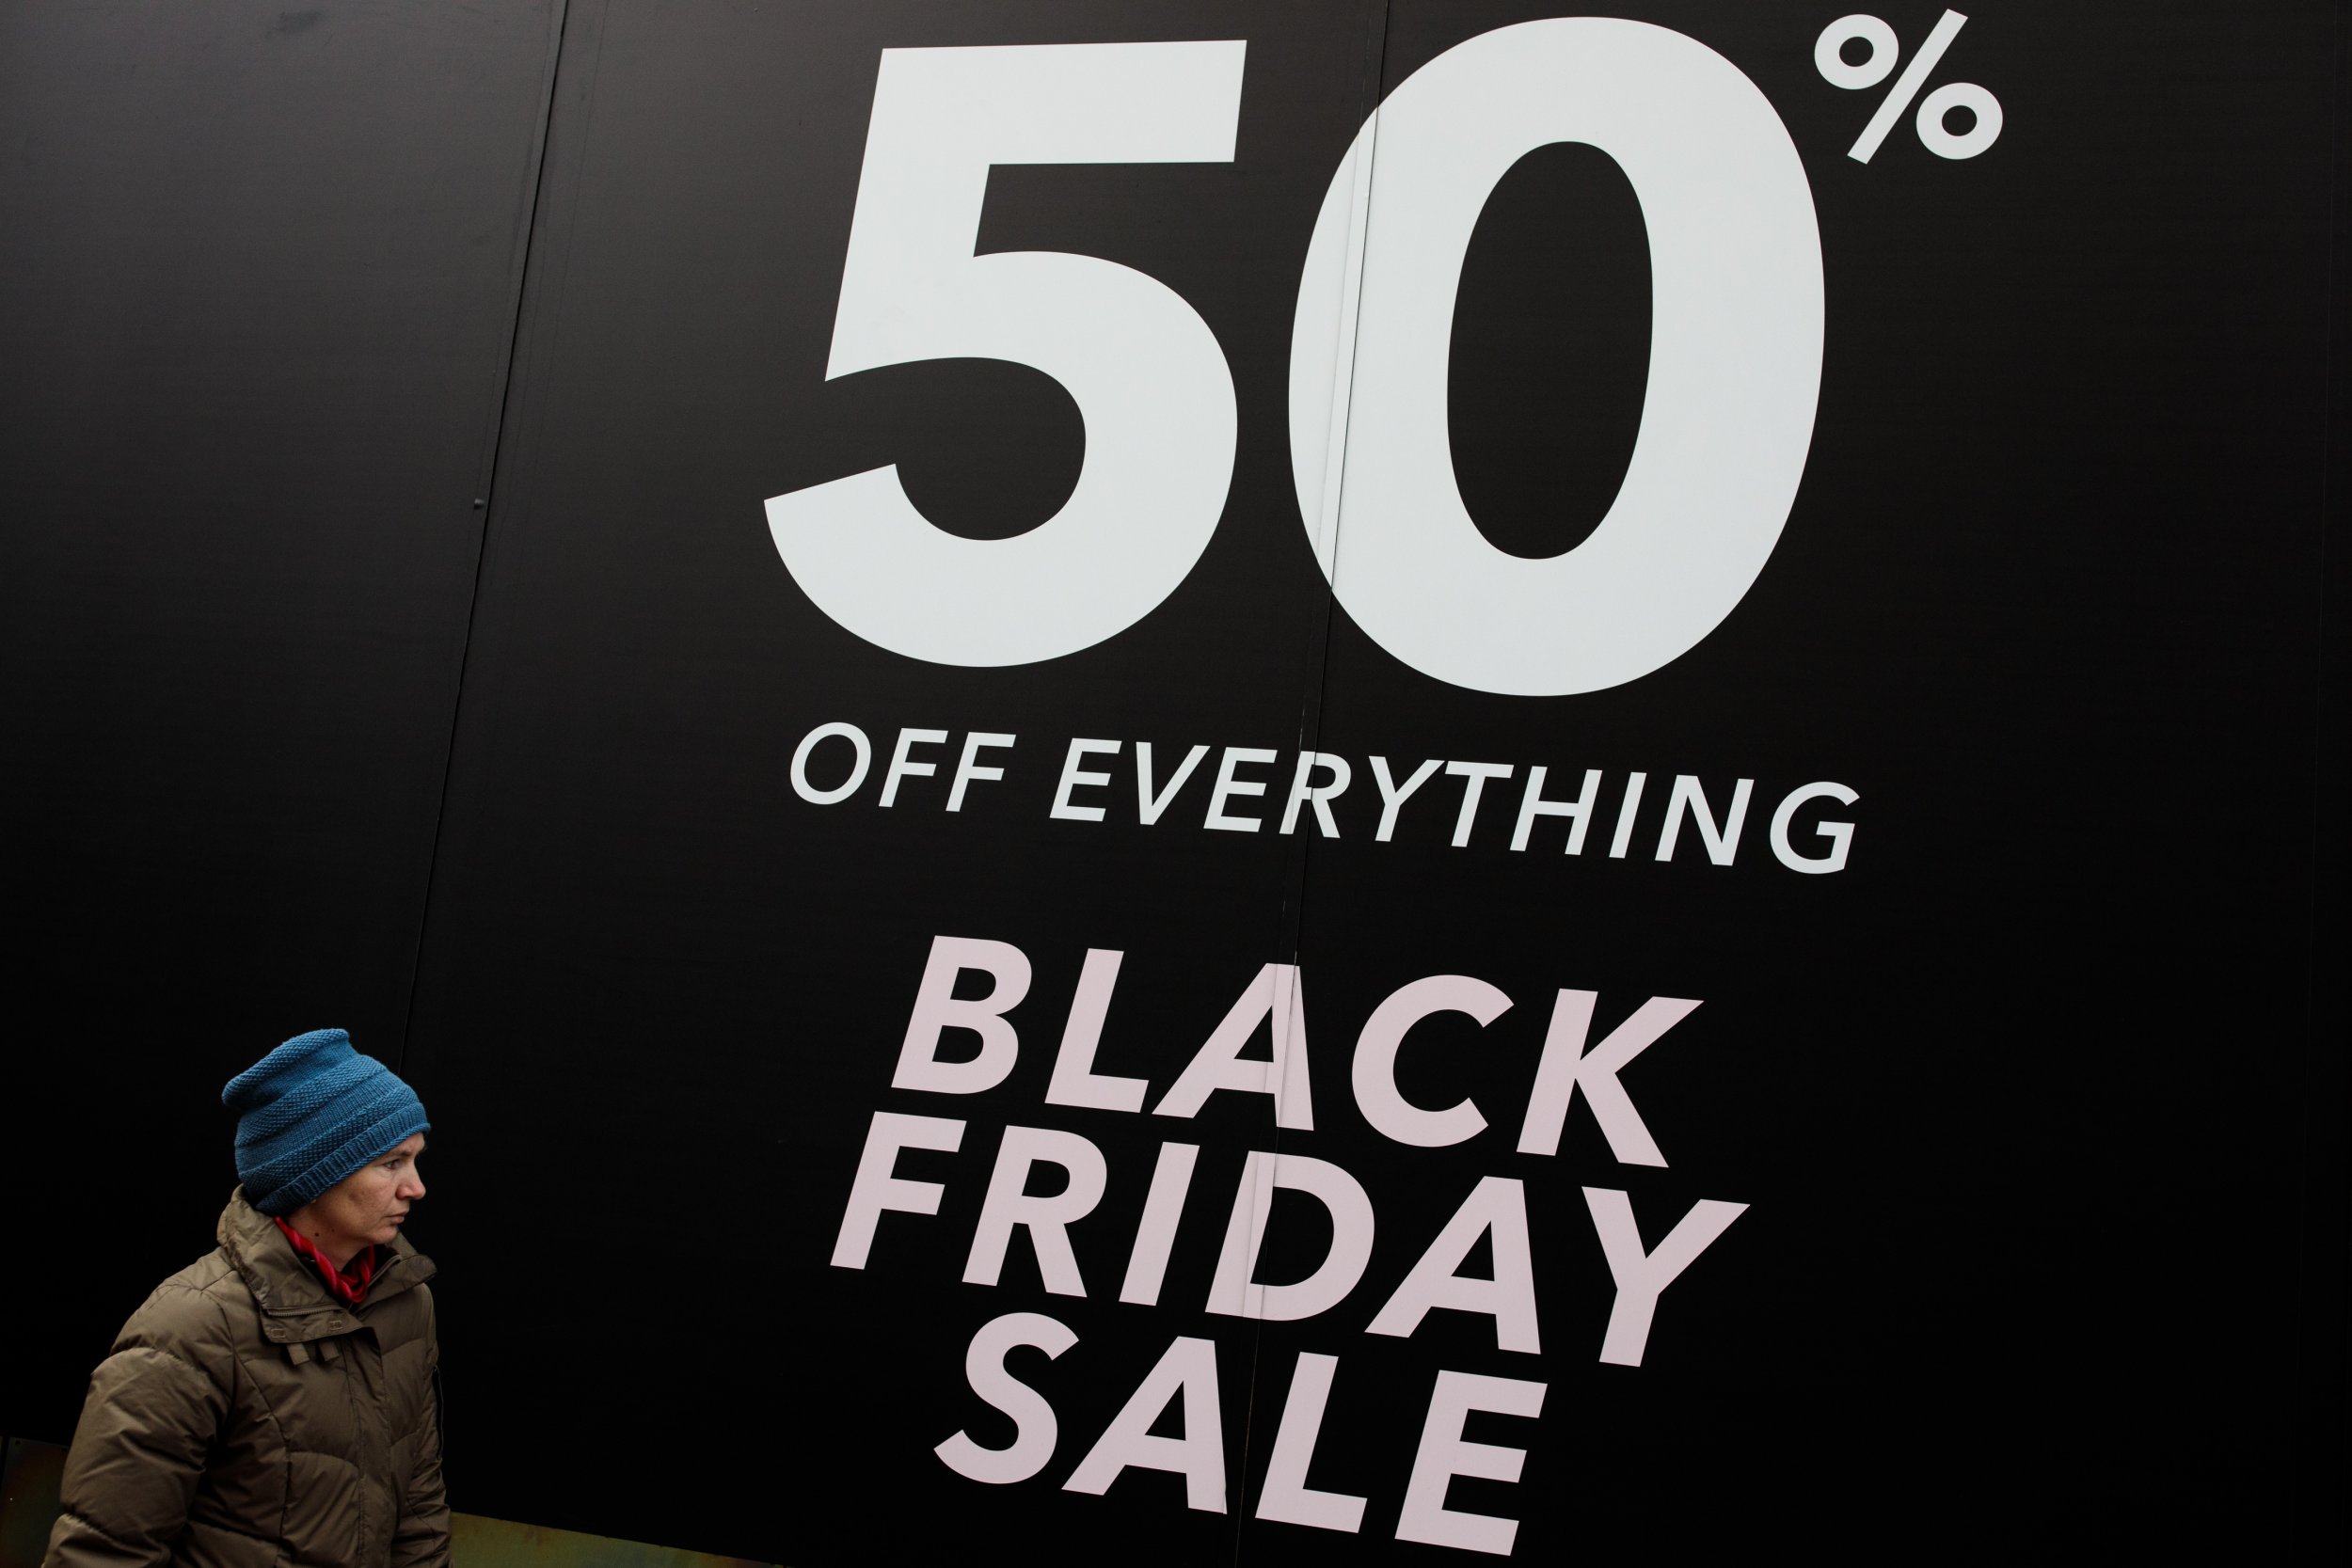 Why Is It Called Black Friday, Cyber Monday? When Are They in 2018? - What Time Can Stores Open On Black Friday In Massachusetts